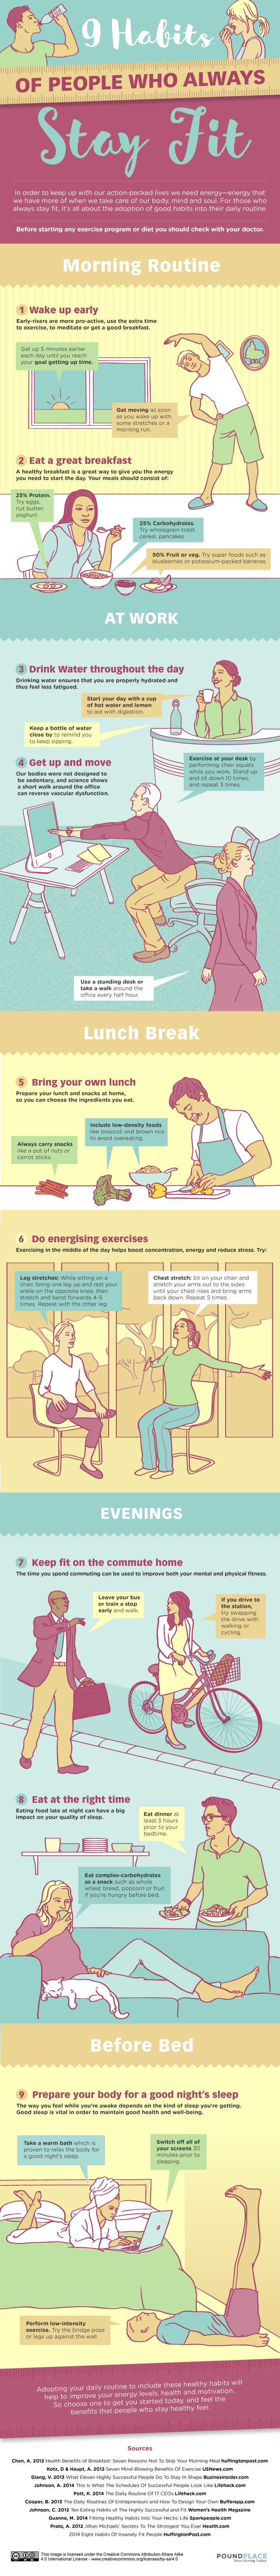 9 Habits Of People Who Always Stay Fit - #infographic